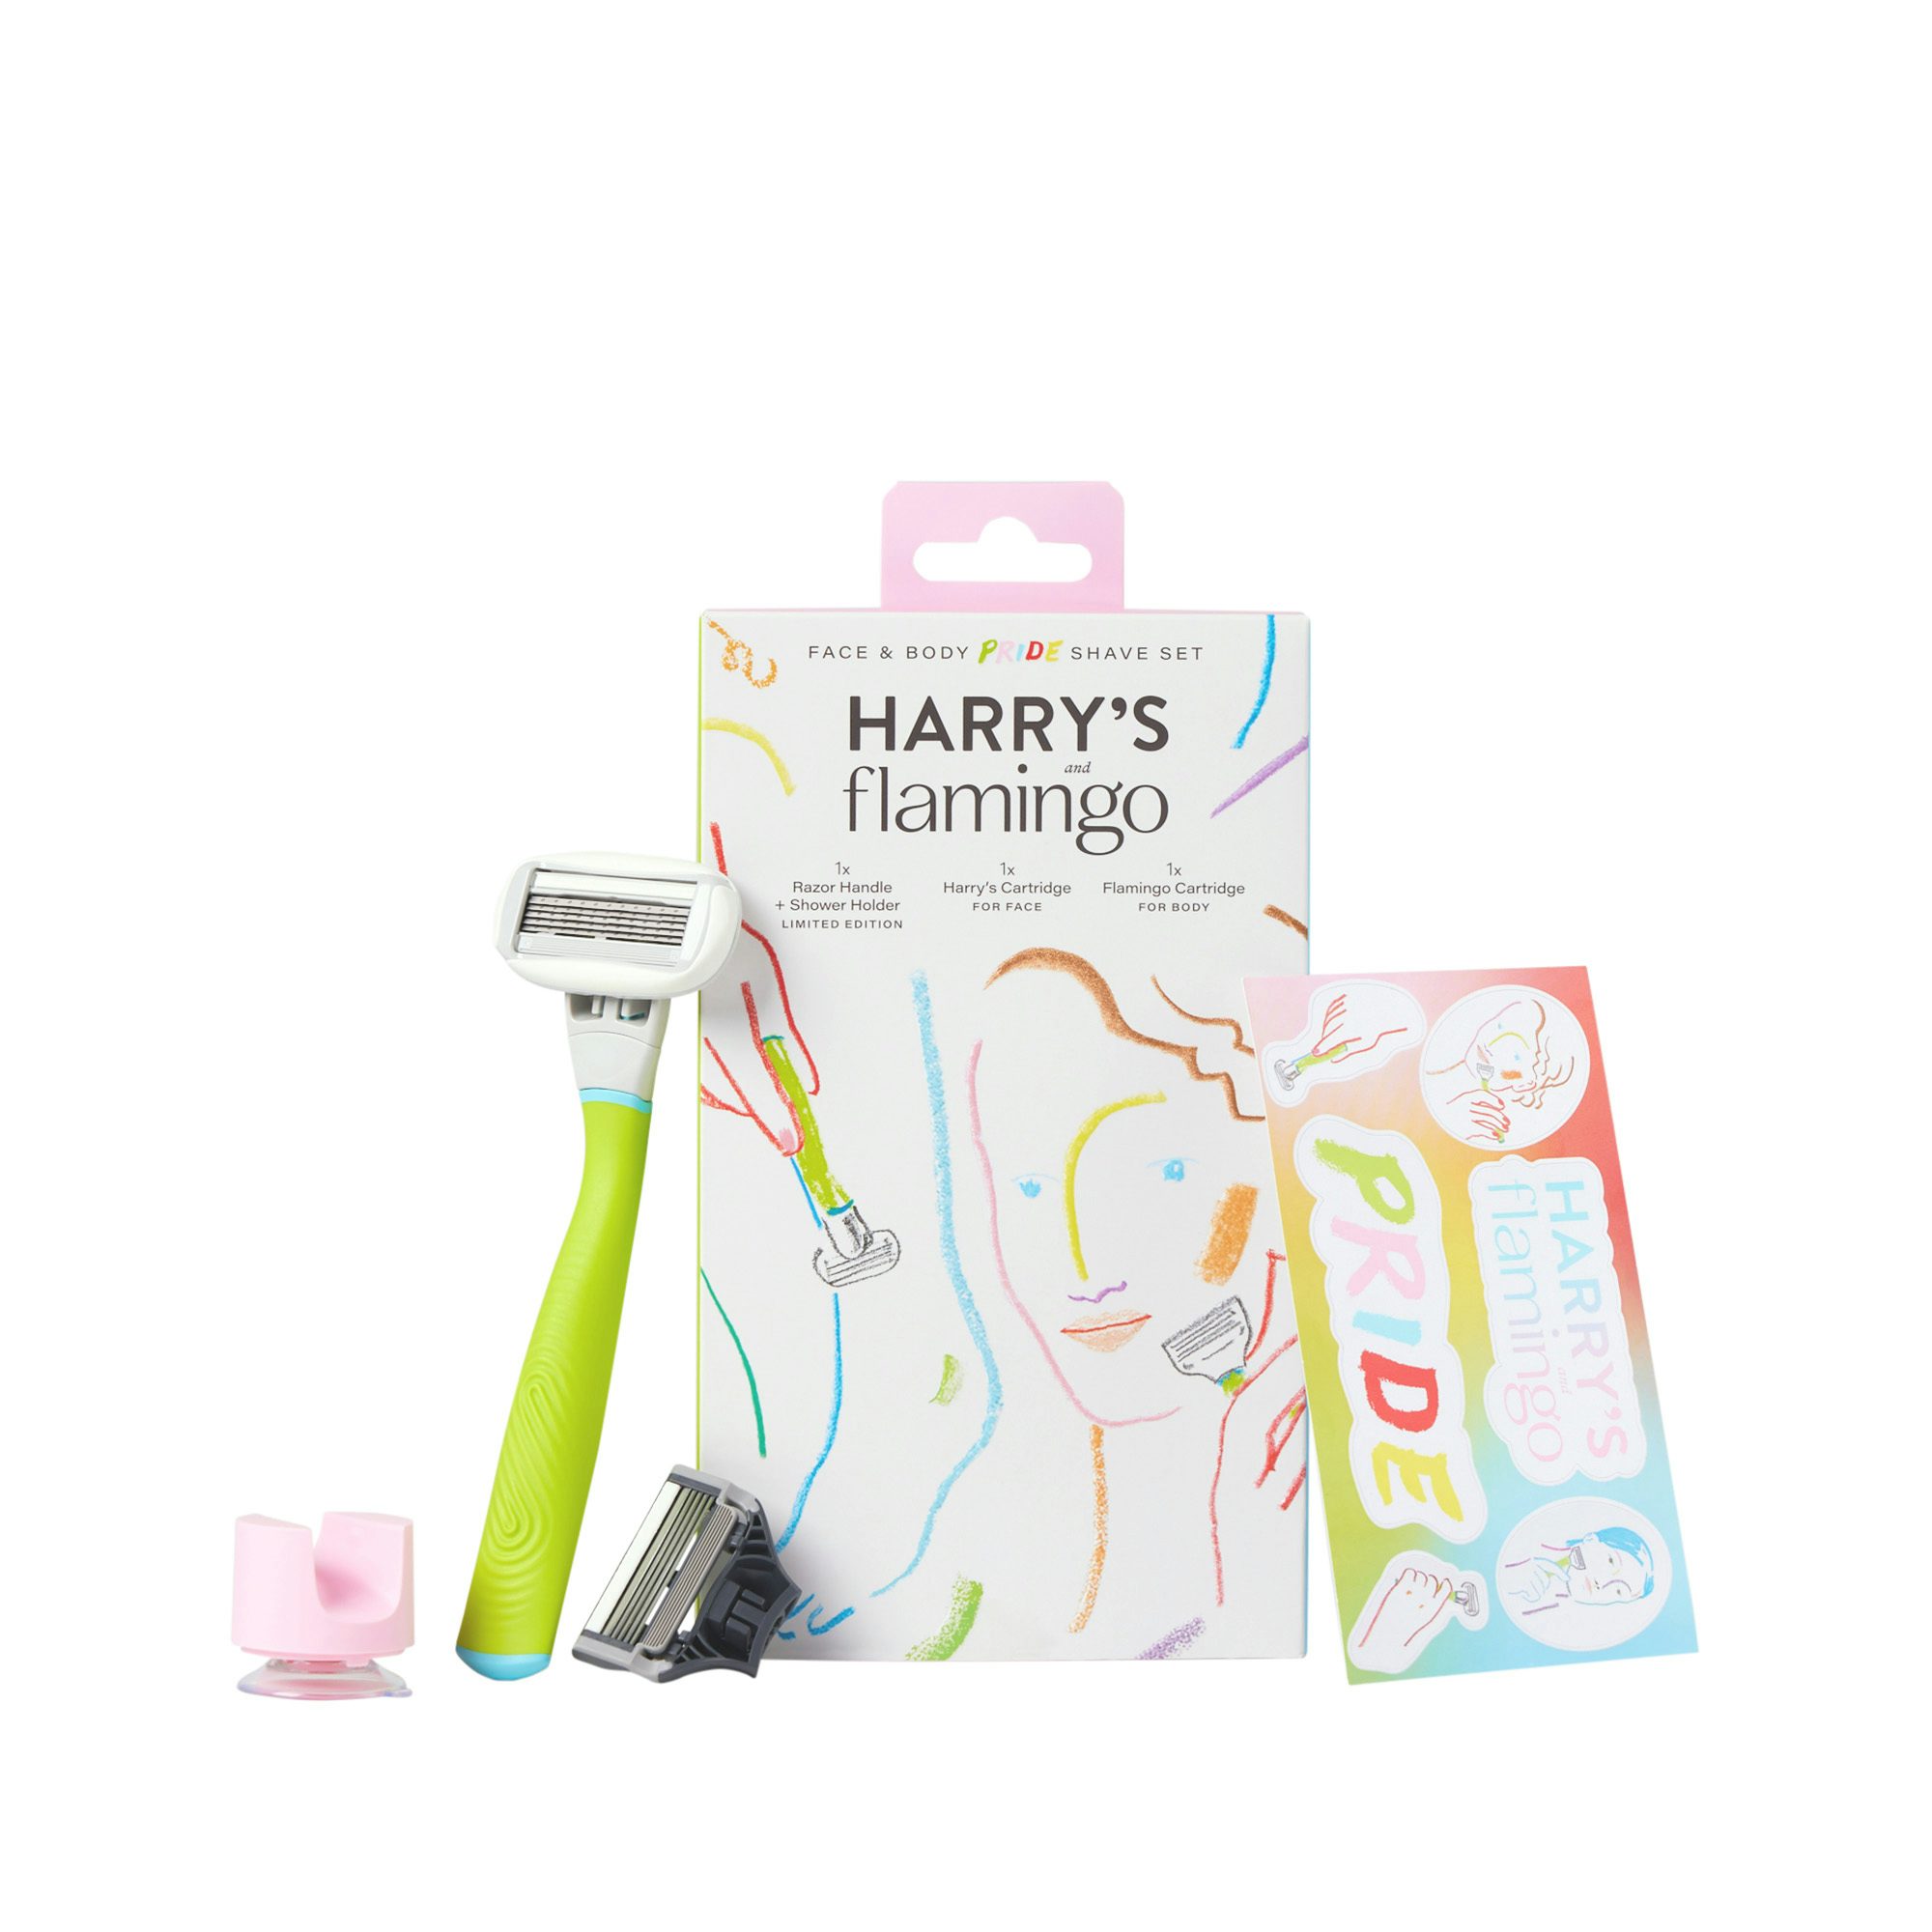 Photograph of the Harrys and Flamingo collaboration